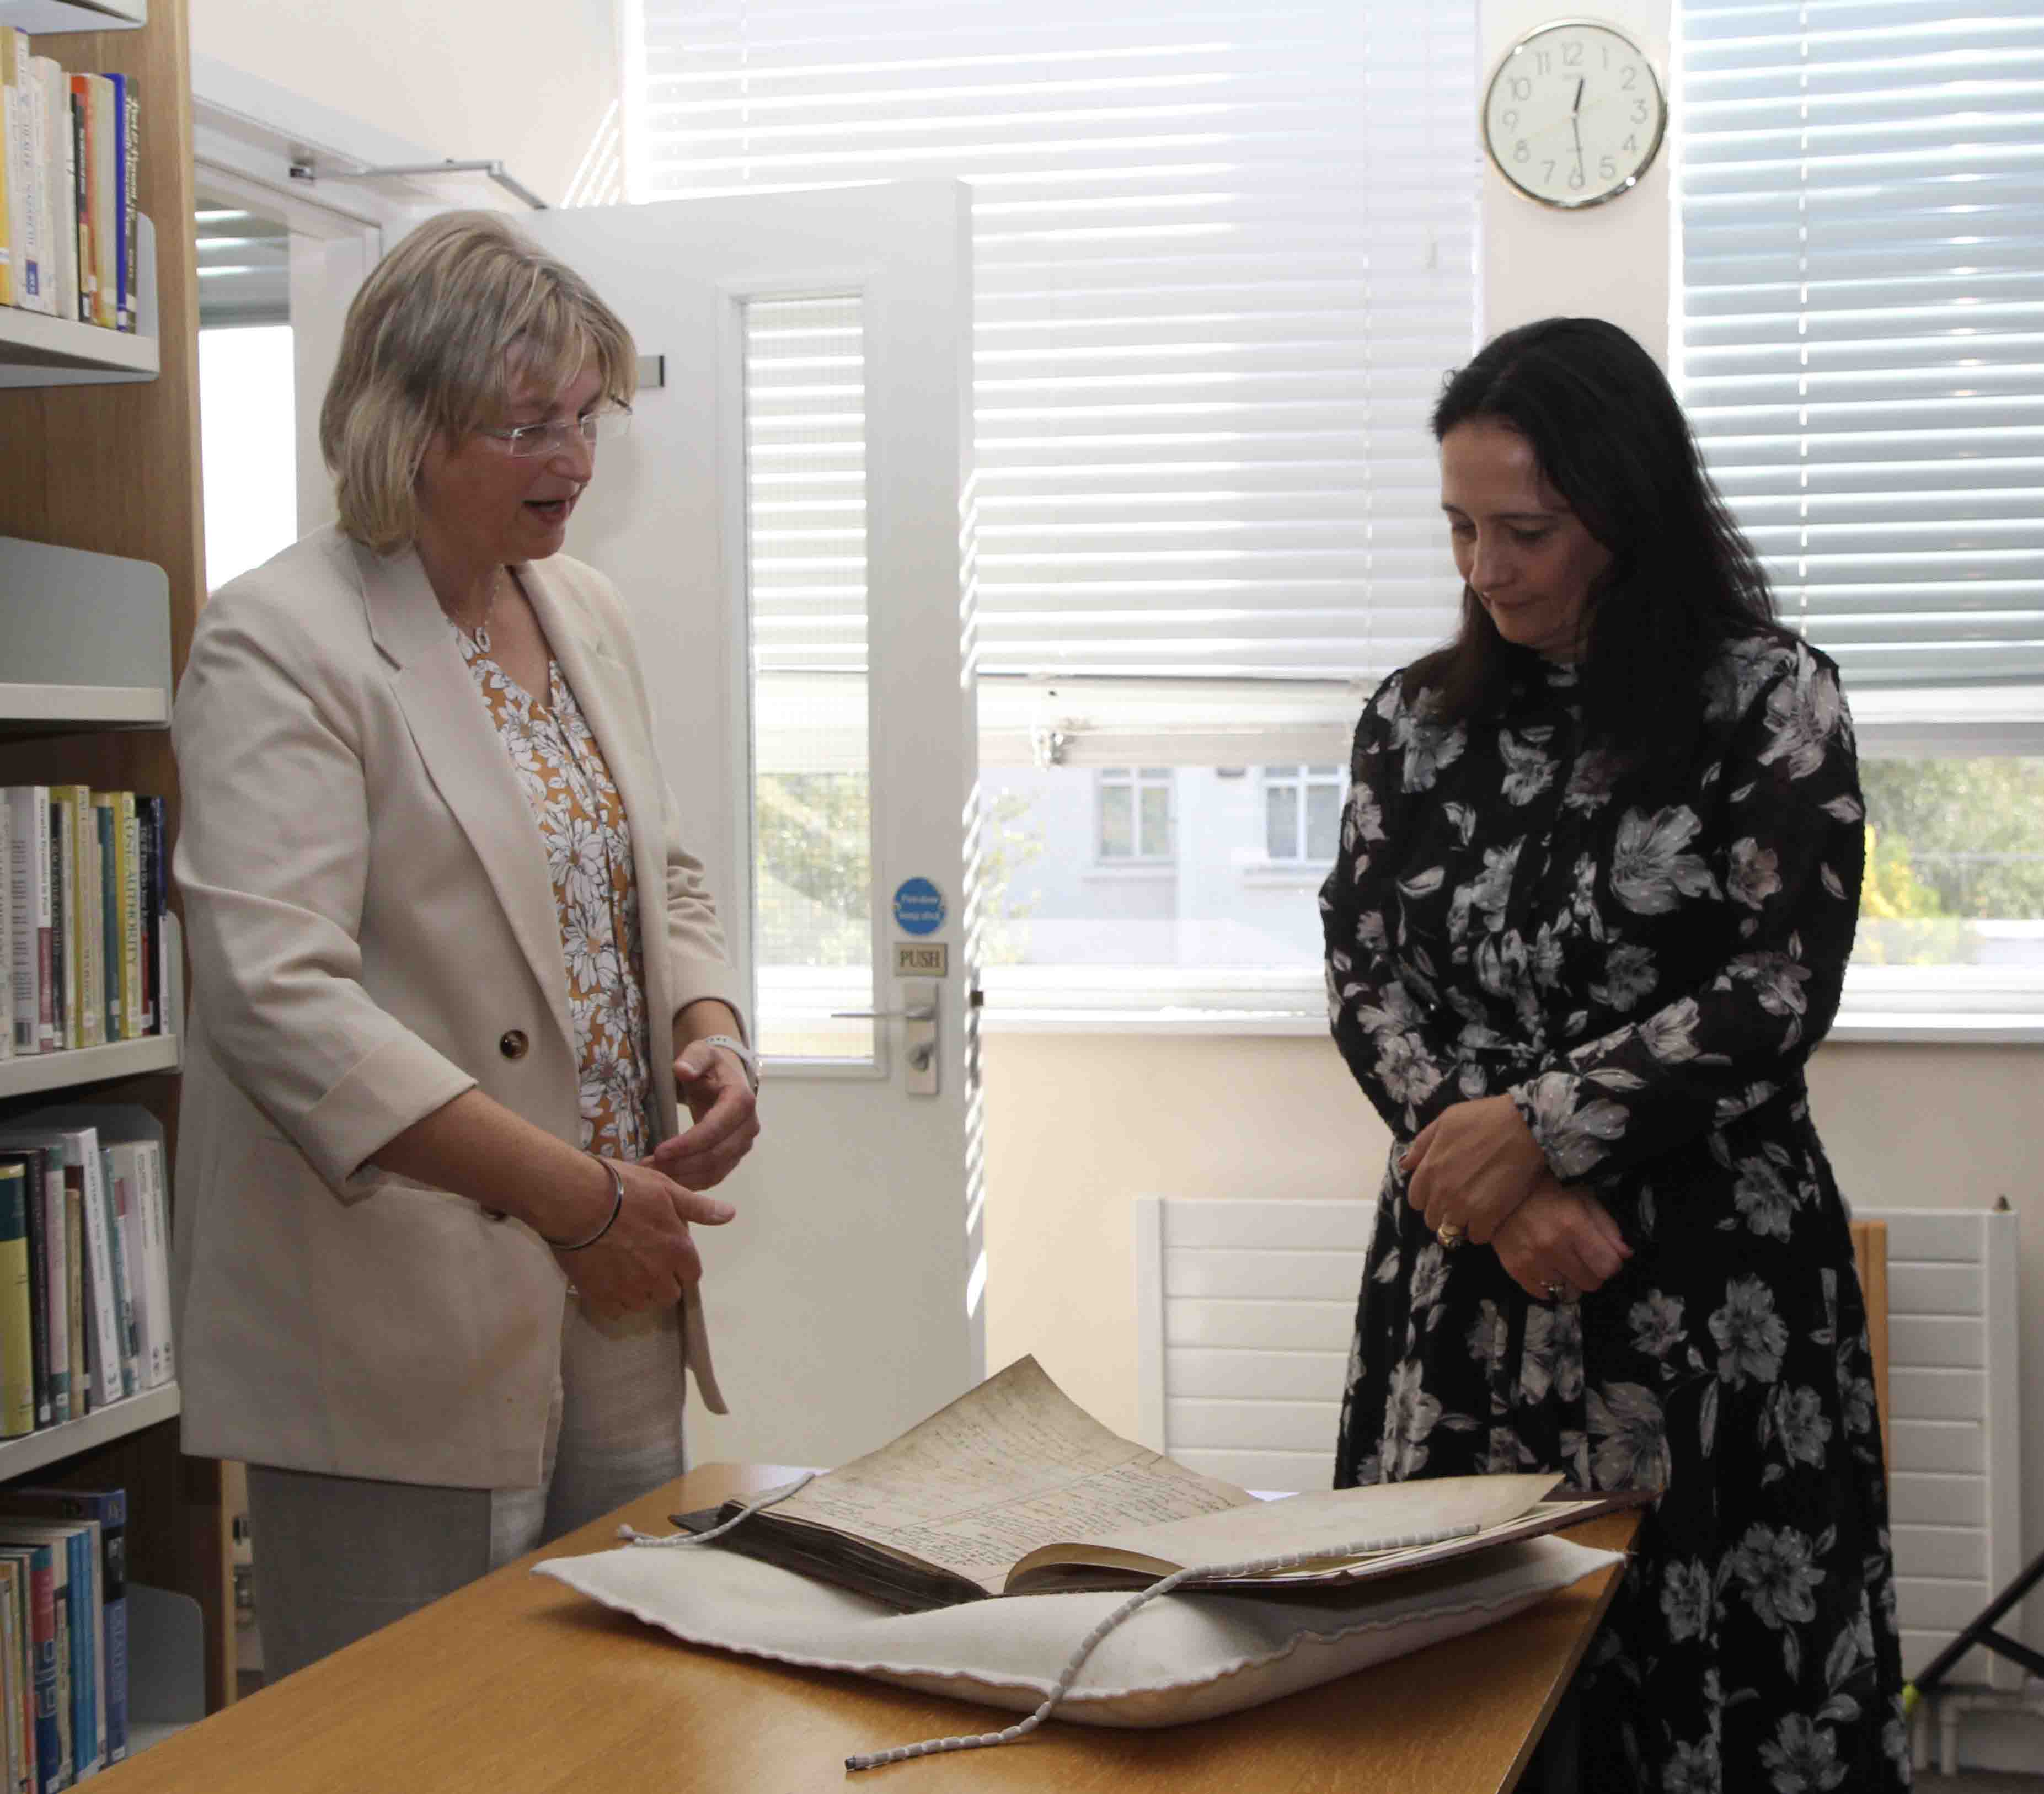 Dr Susan Hood shows Minister Martin some of the Library's collections.